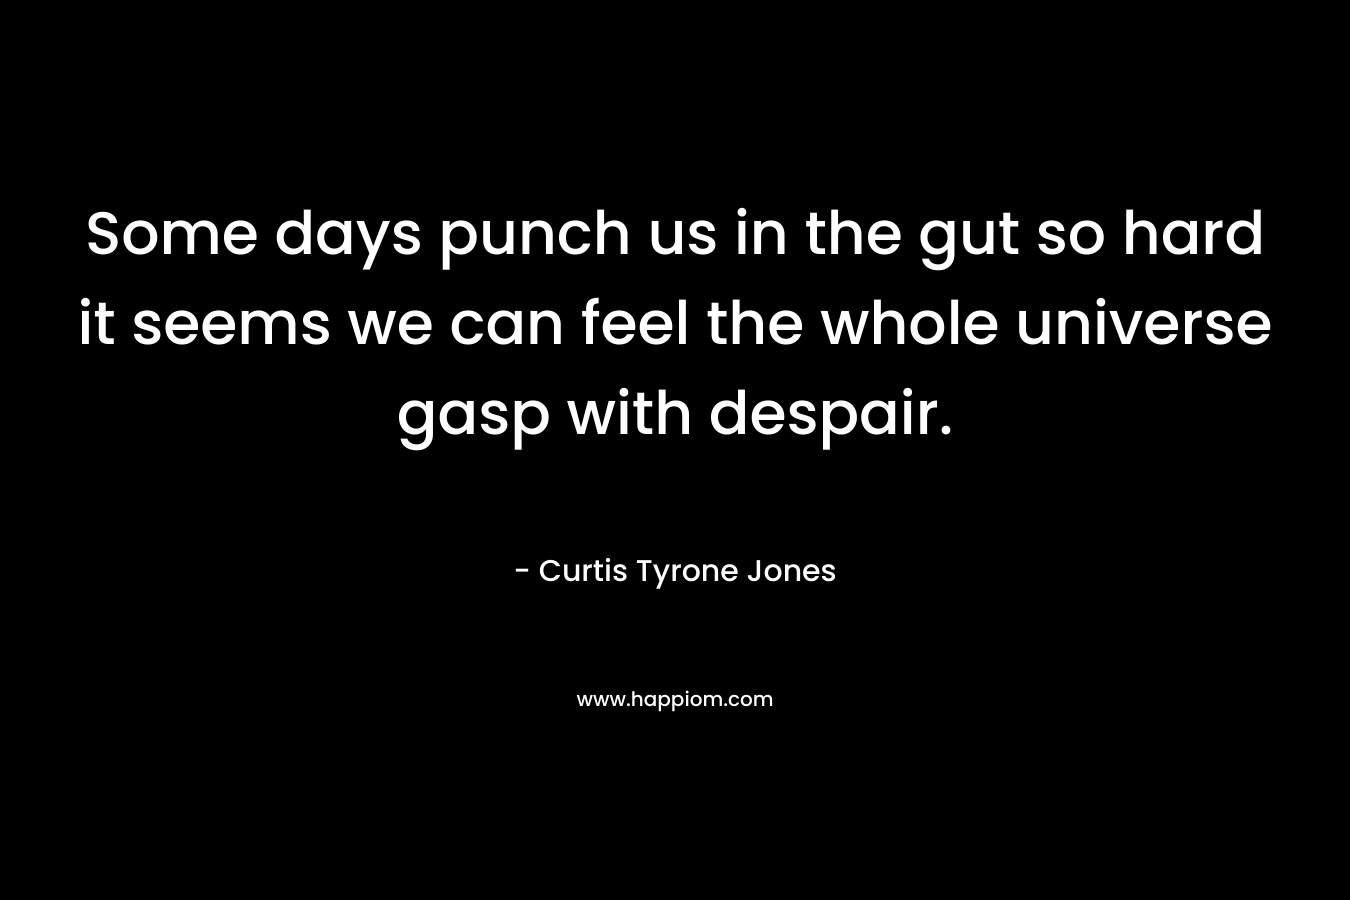 Some days punch us in the gut so hard it seems we can feel the whole universe gasp with despair.